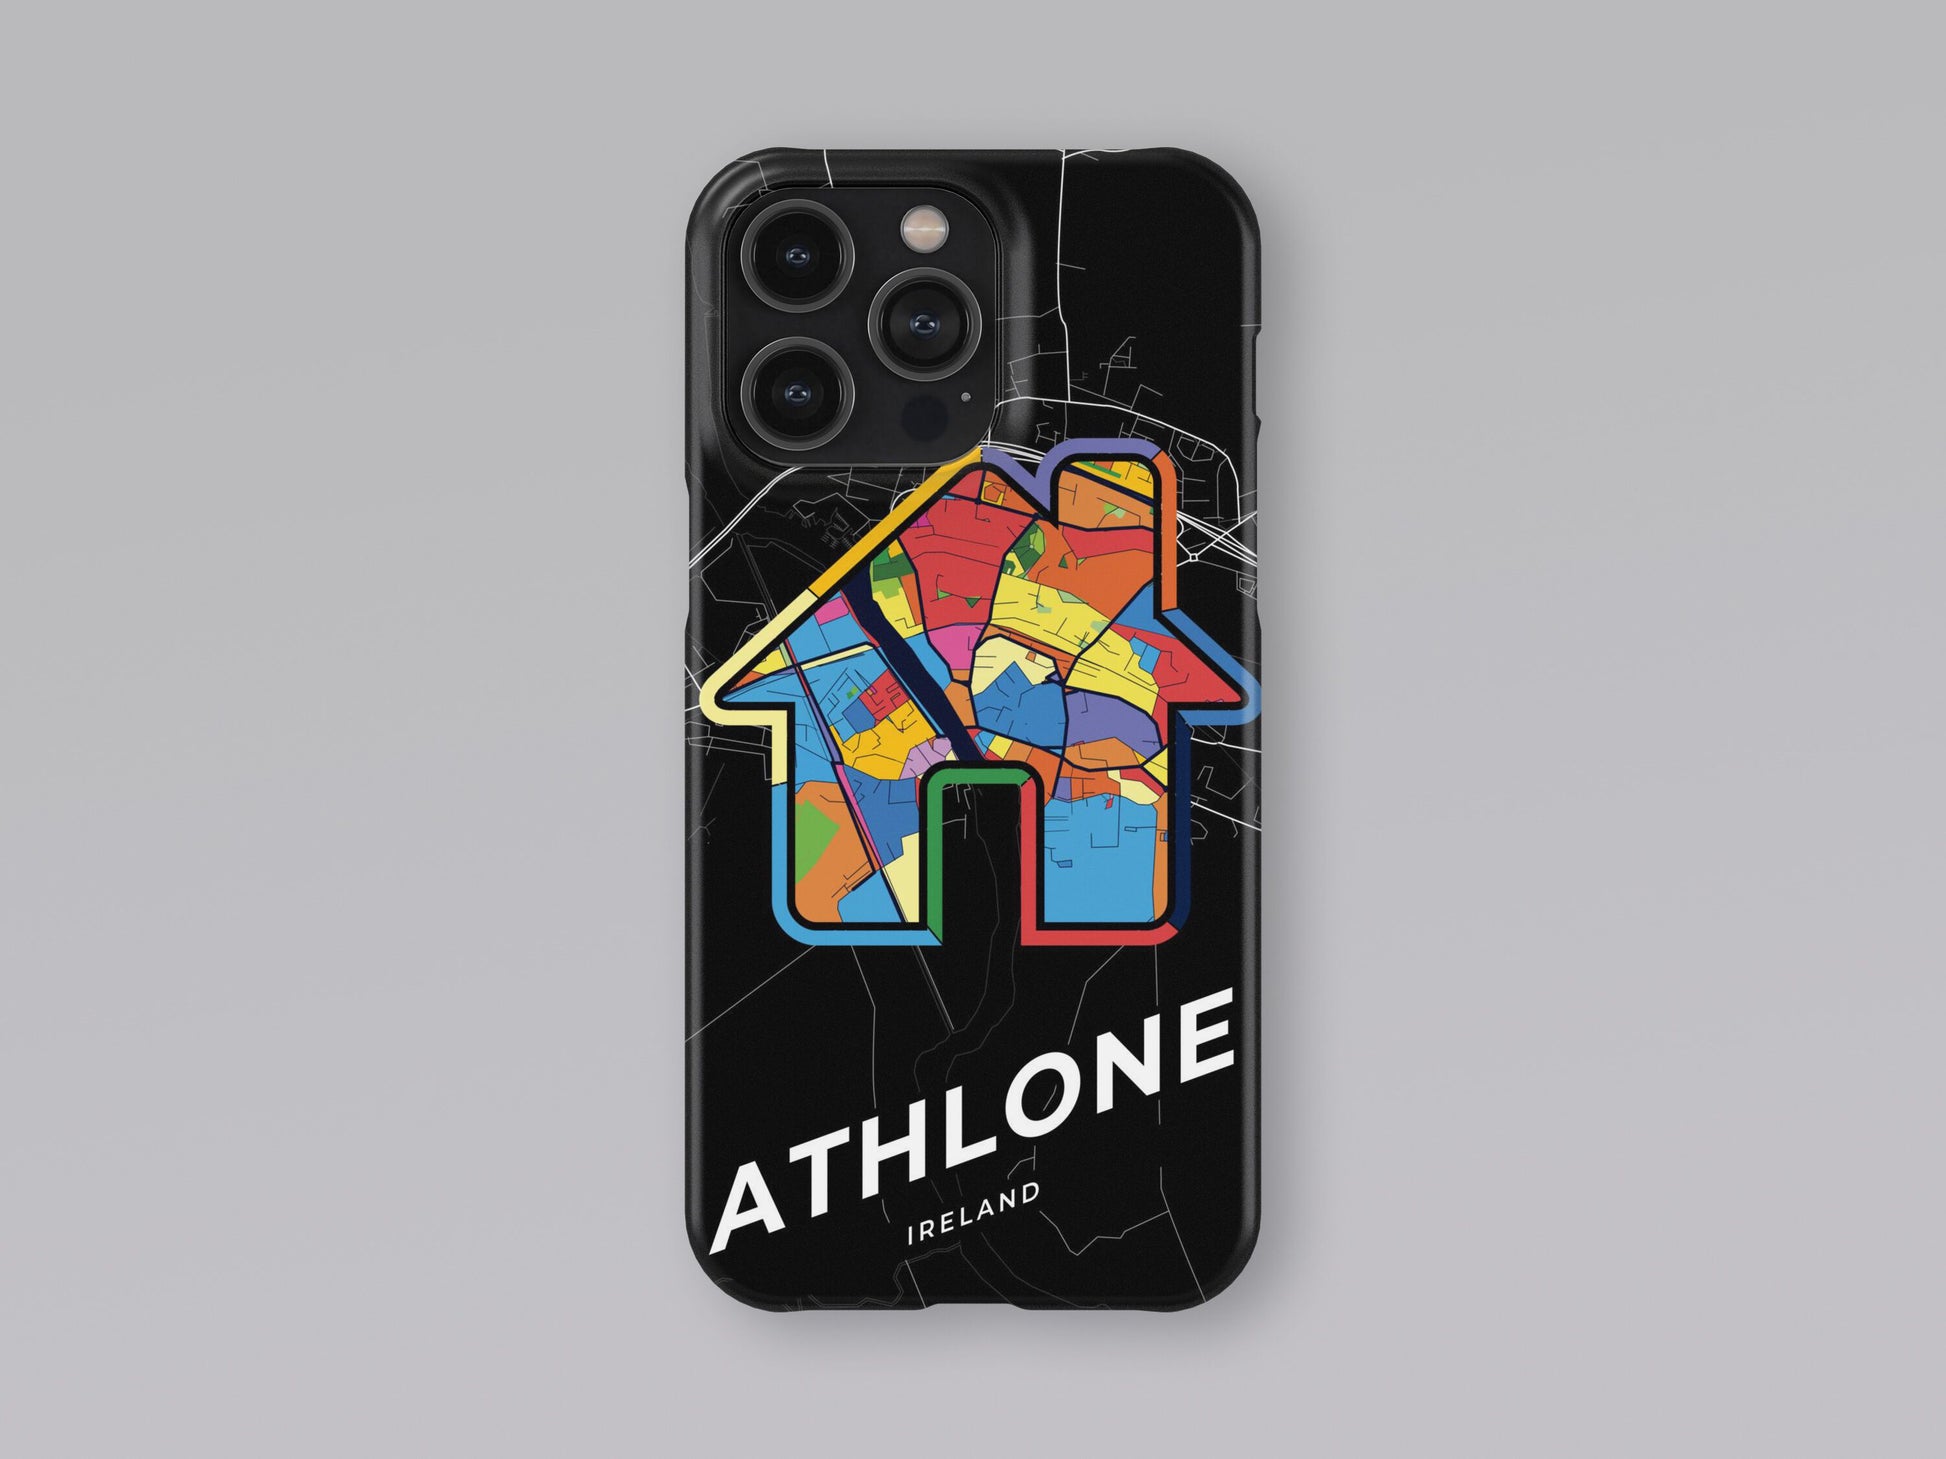 Athlone Ireland slim phone case with colorful icon. Birthday, wedding or housewarming gift. Couple match cases. 3